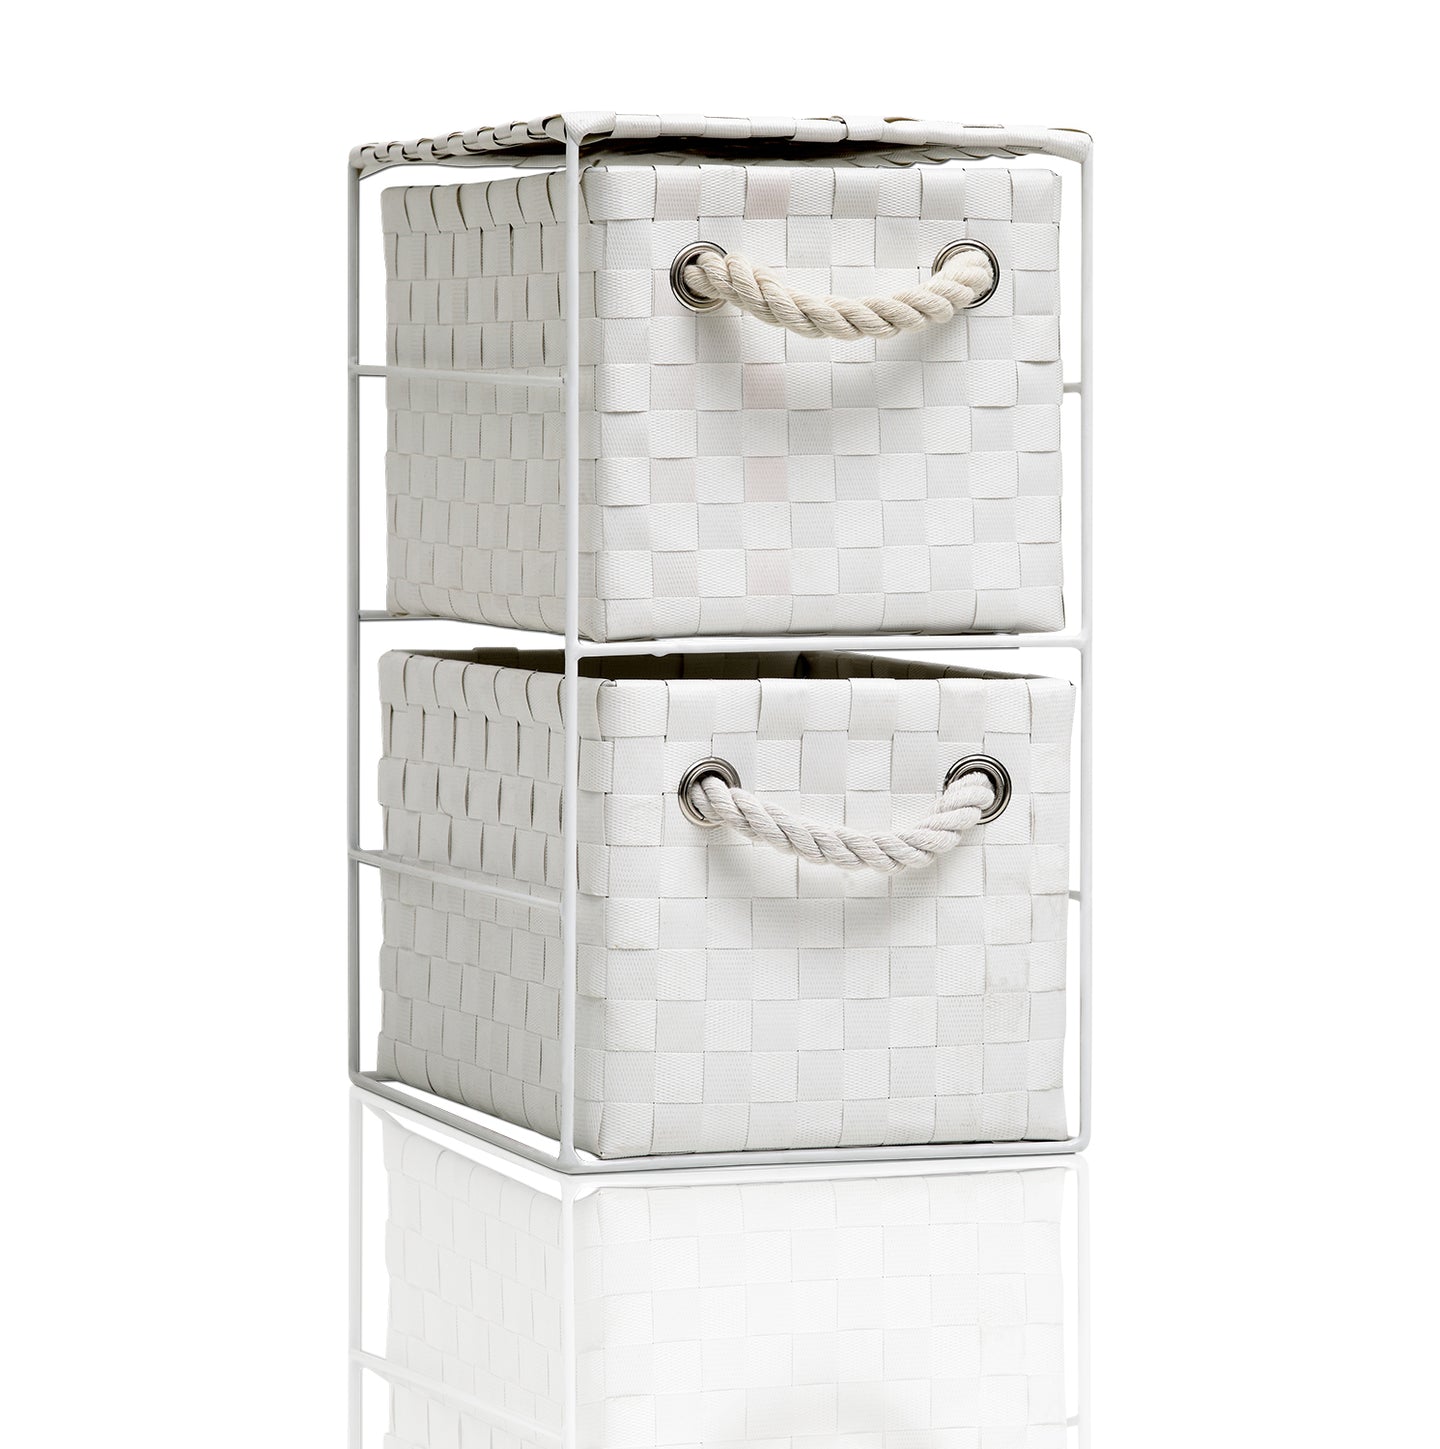 Arpan 2 Drawer Storage Cabinet Unit Ideal for Home/Office/bedrooms (2 Drawer Unit -18x25x33cm)